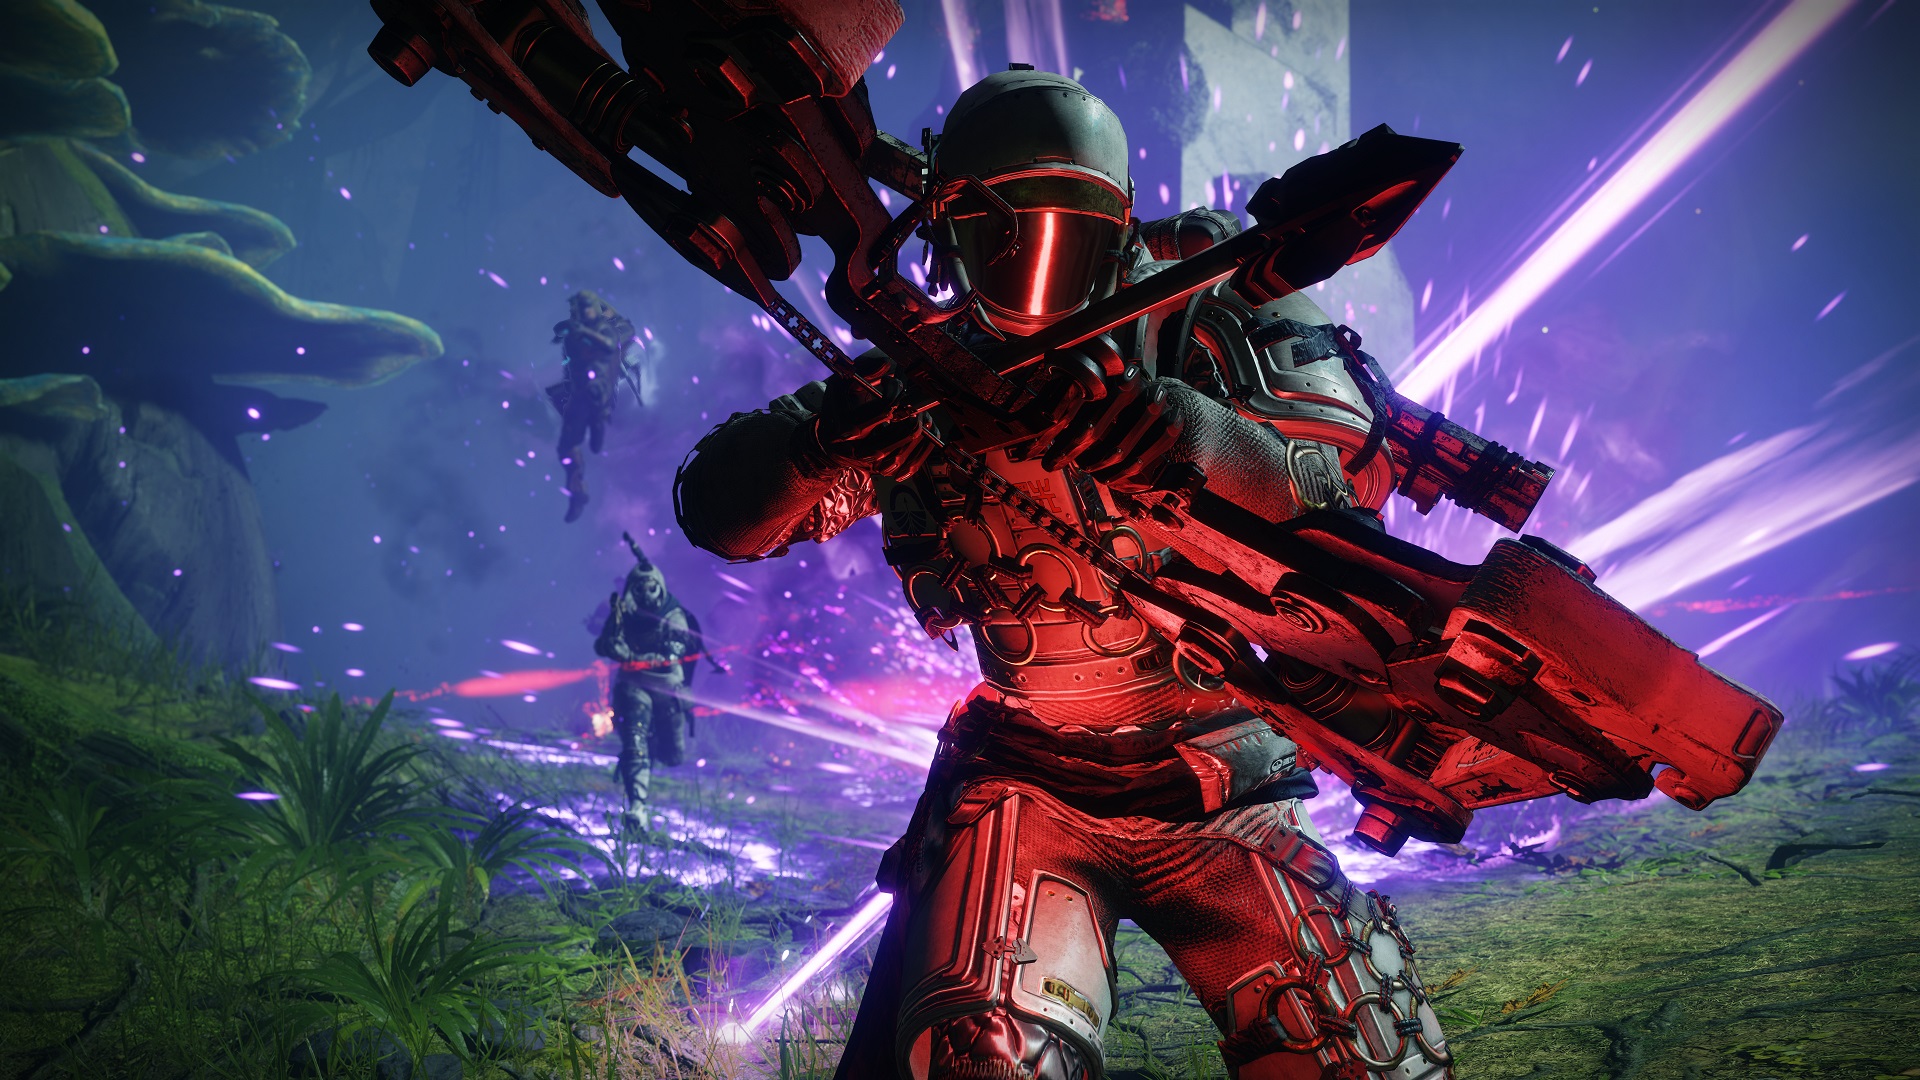 Destiny is hiding a teaser for Bungie’s new IP